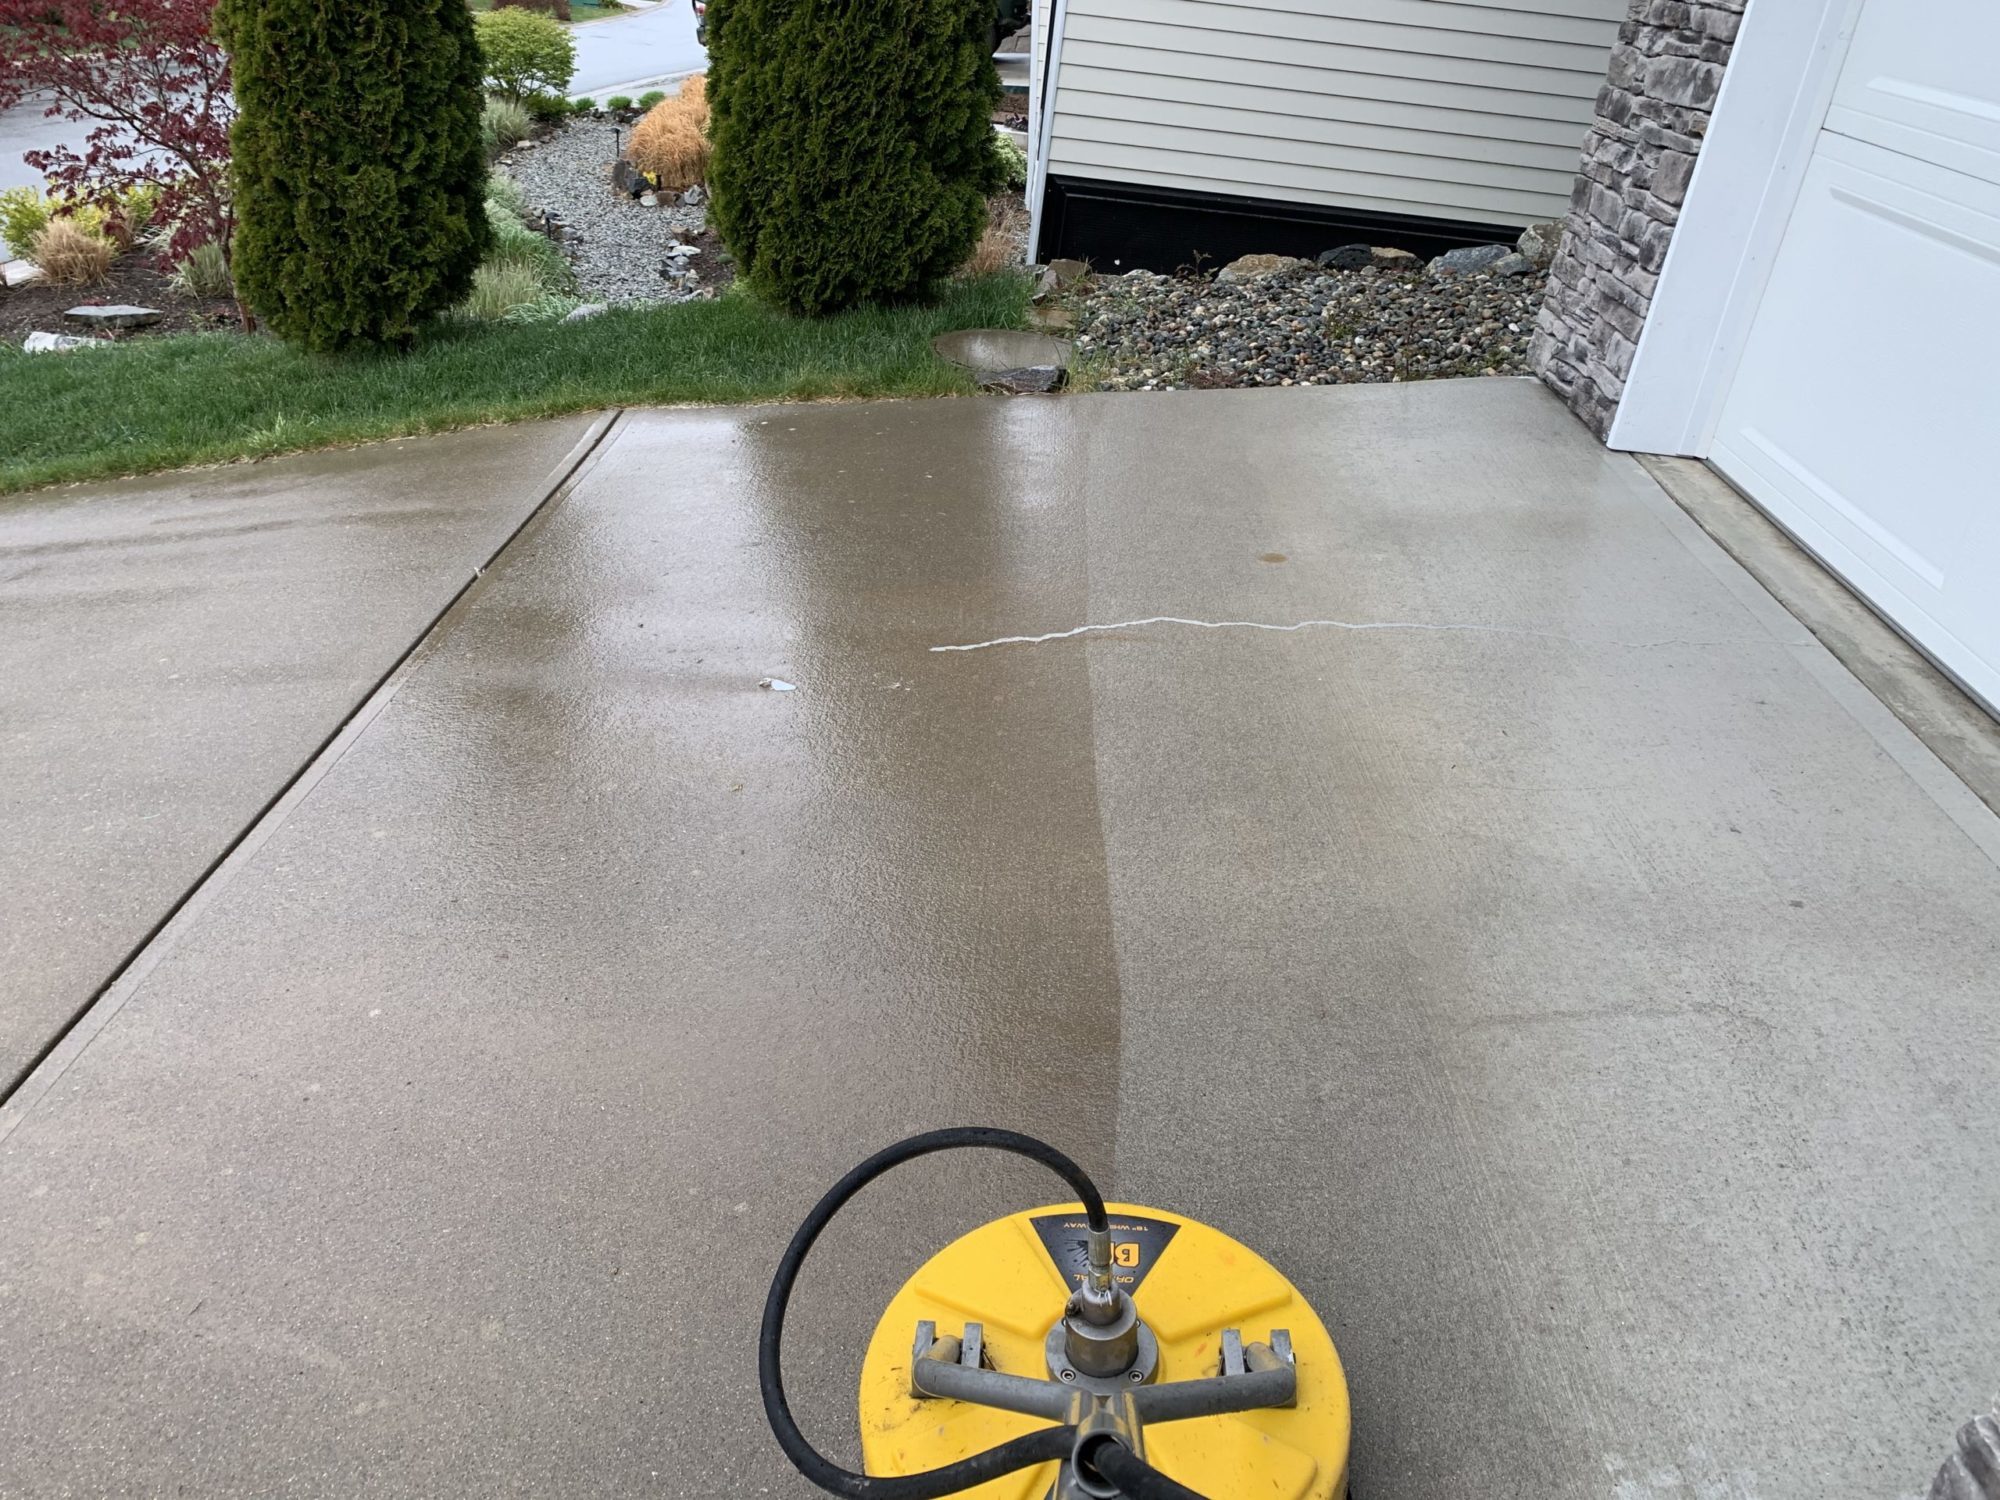 Professional Concrete Cleaning - Bring Out The Best In Your Home